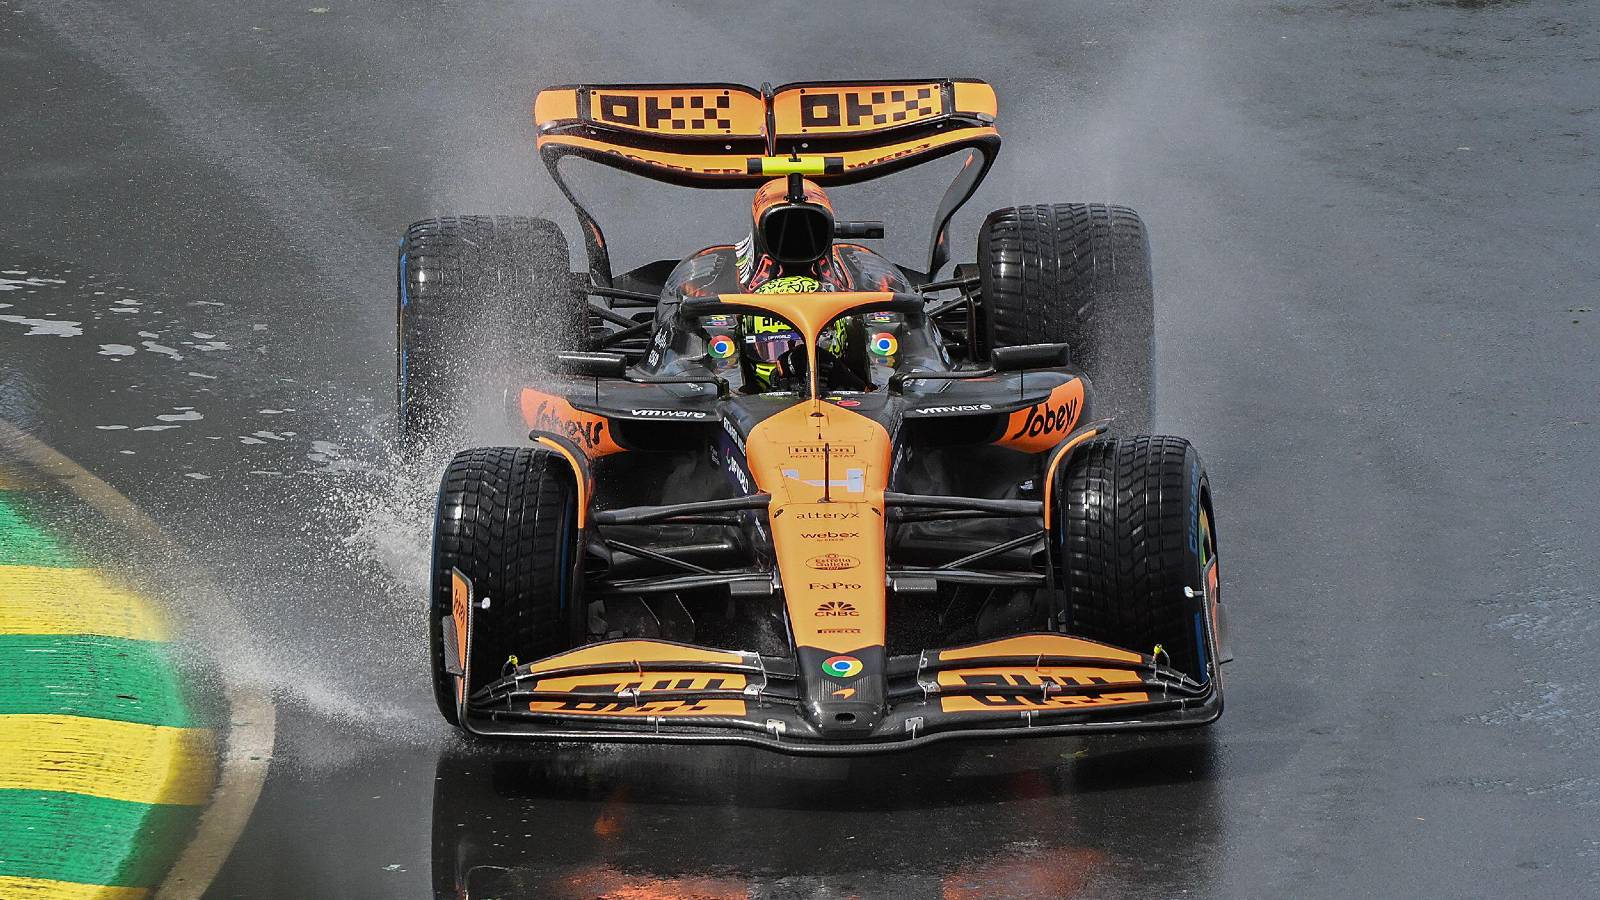 Norris Shines in Wet-to-Dry Practice Session at F1 Canadian Grand Prix